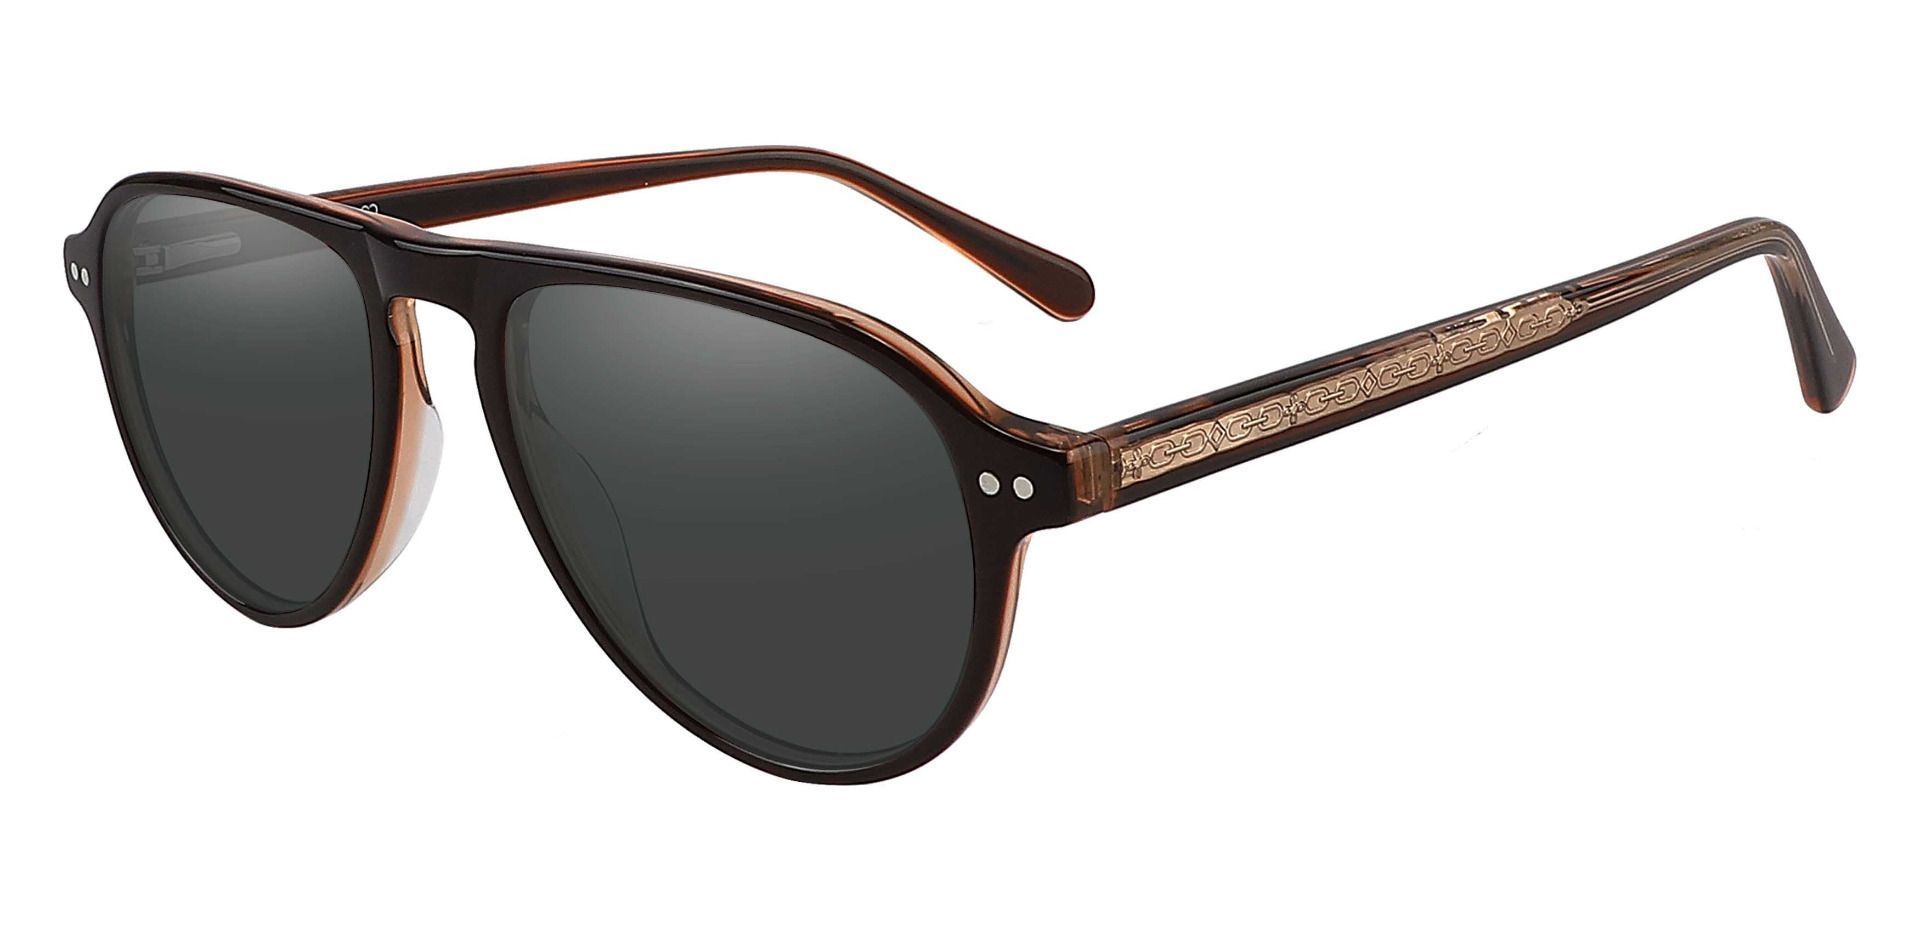 Durham Aviator Non-Rx Sunglasses - Brown Frame With Gray Lenses